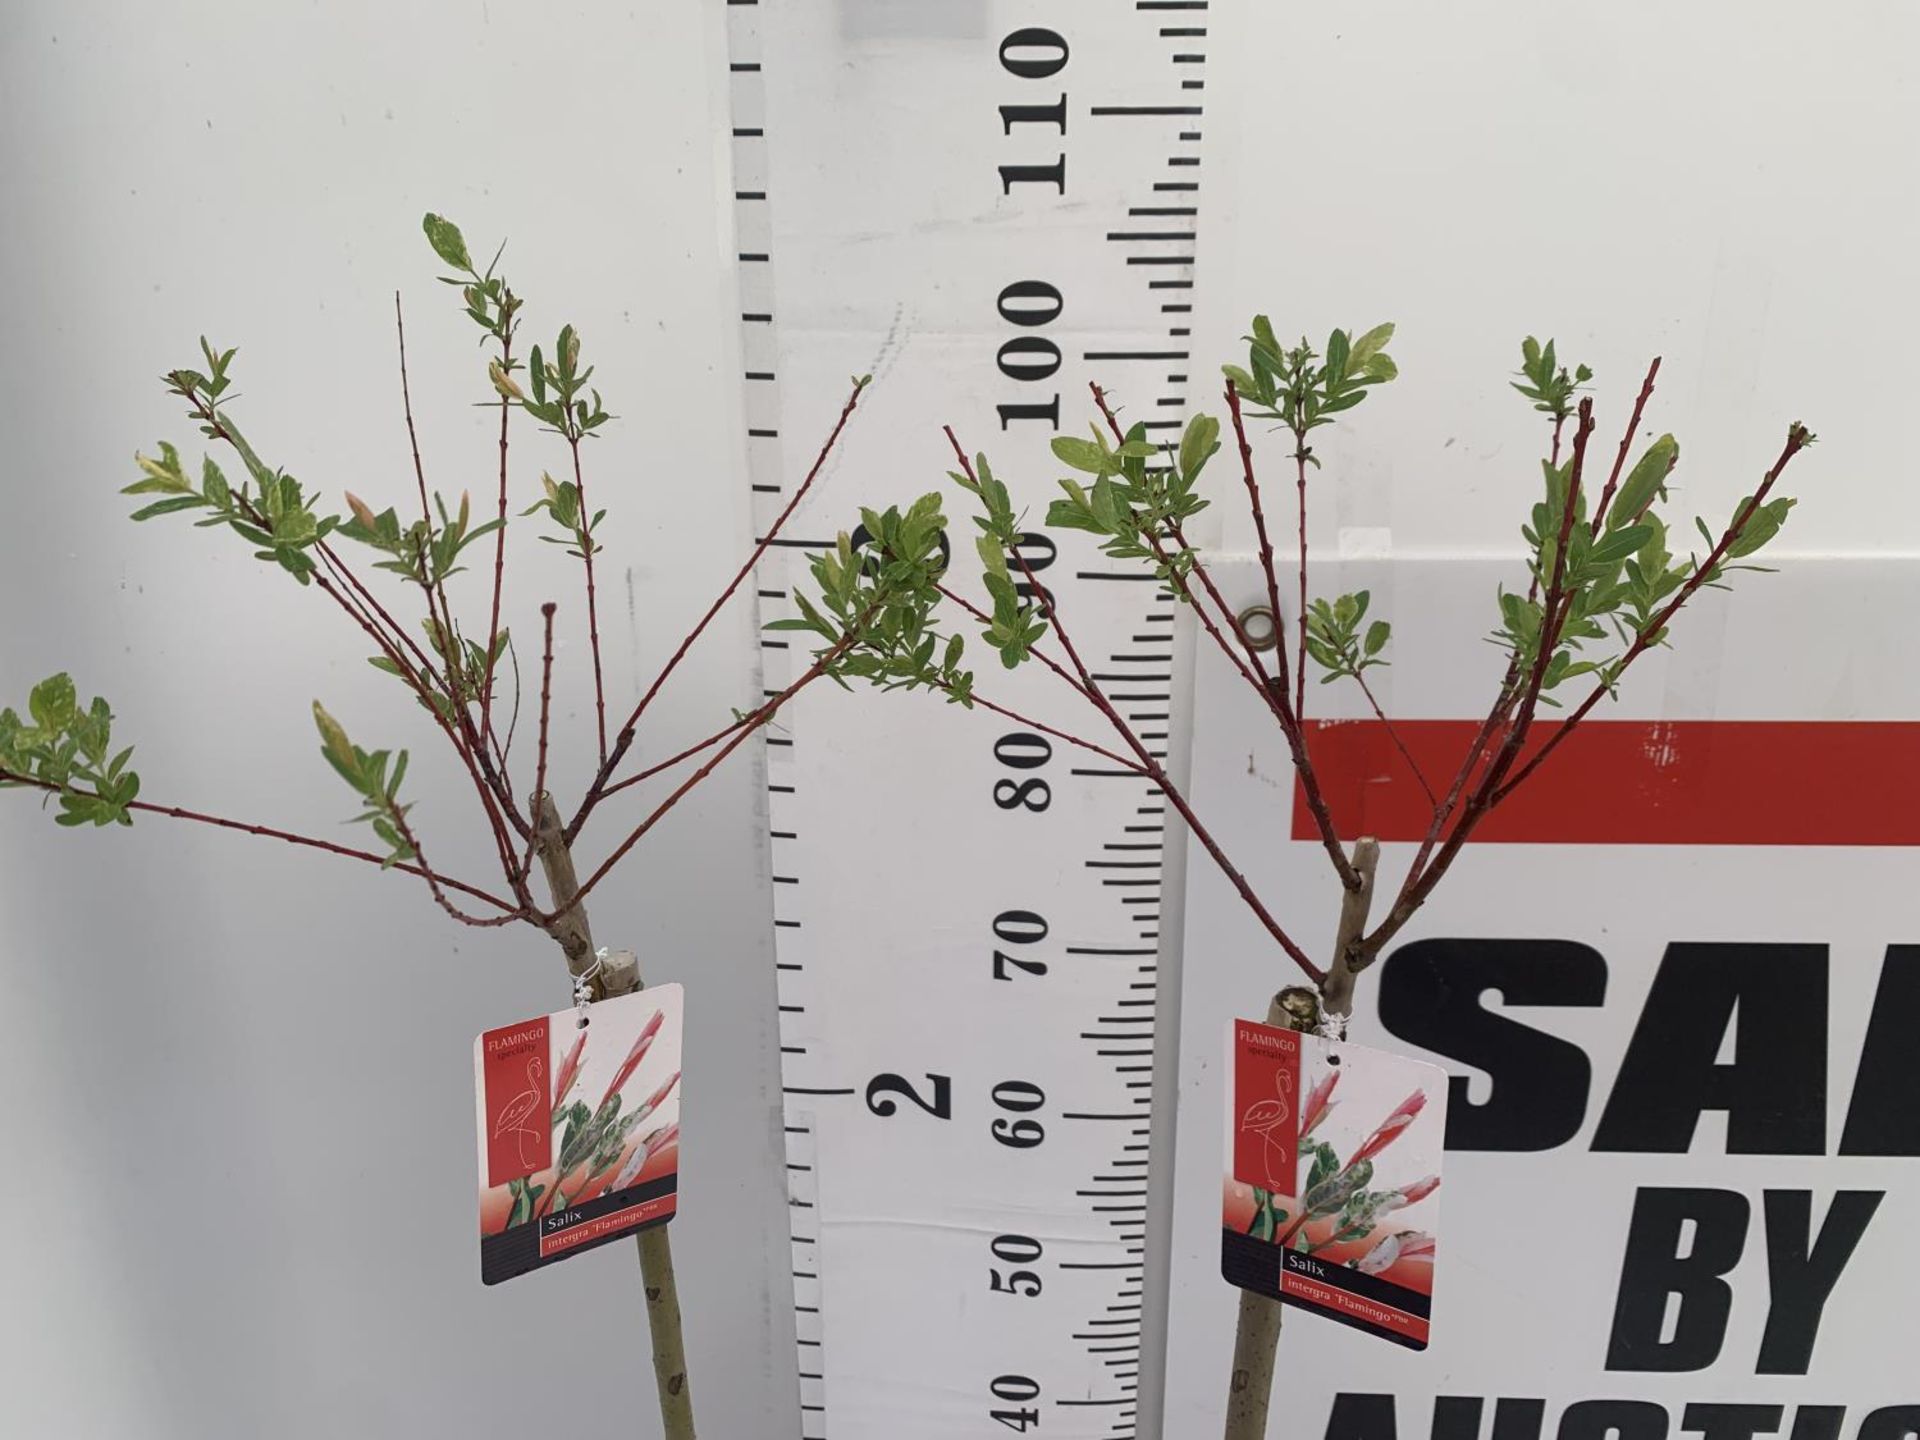 TWO STANDARD SALIX INTEGRA 'FLAMINGO' OVER 110CM IN HEIGHT IN 3 LTR POTS PLUS VAT TO BE SOLD FOR THE - Image 2 of 5